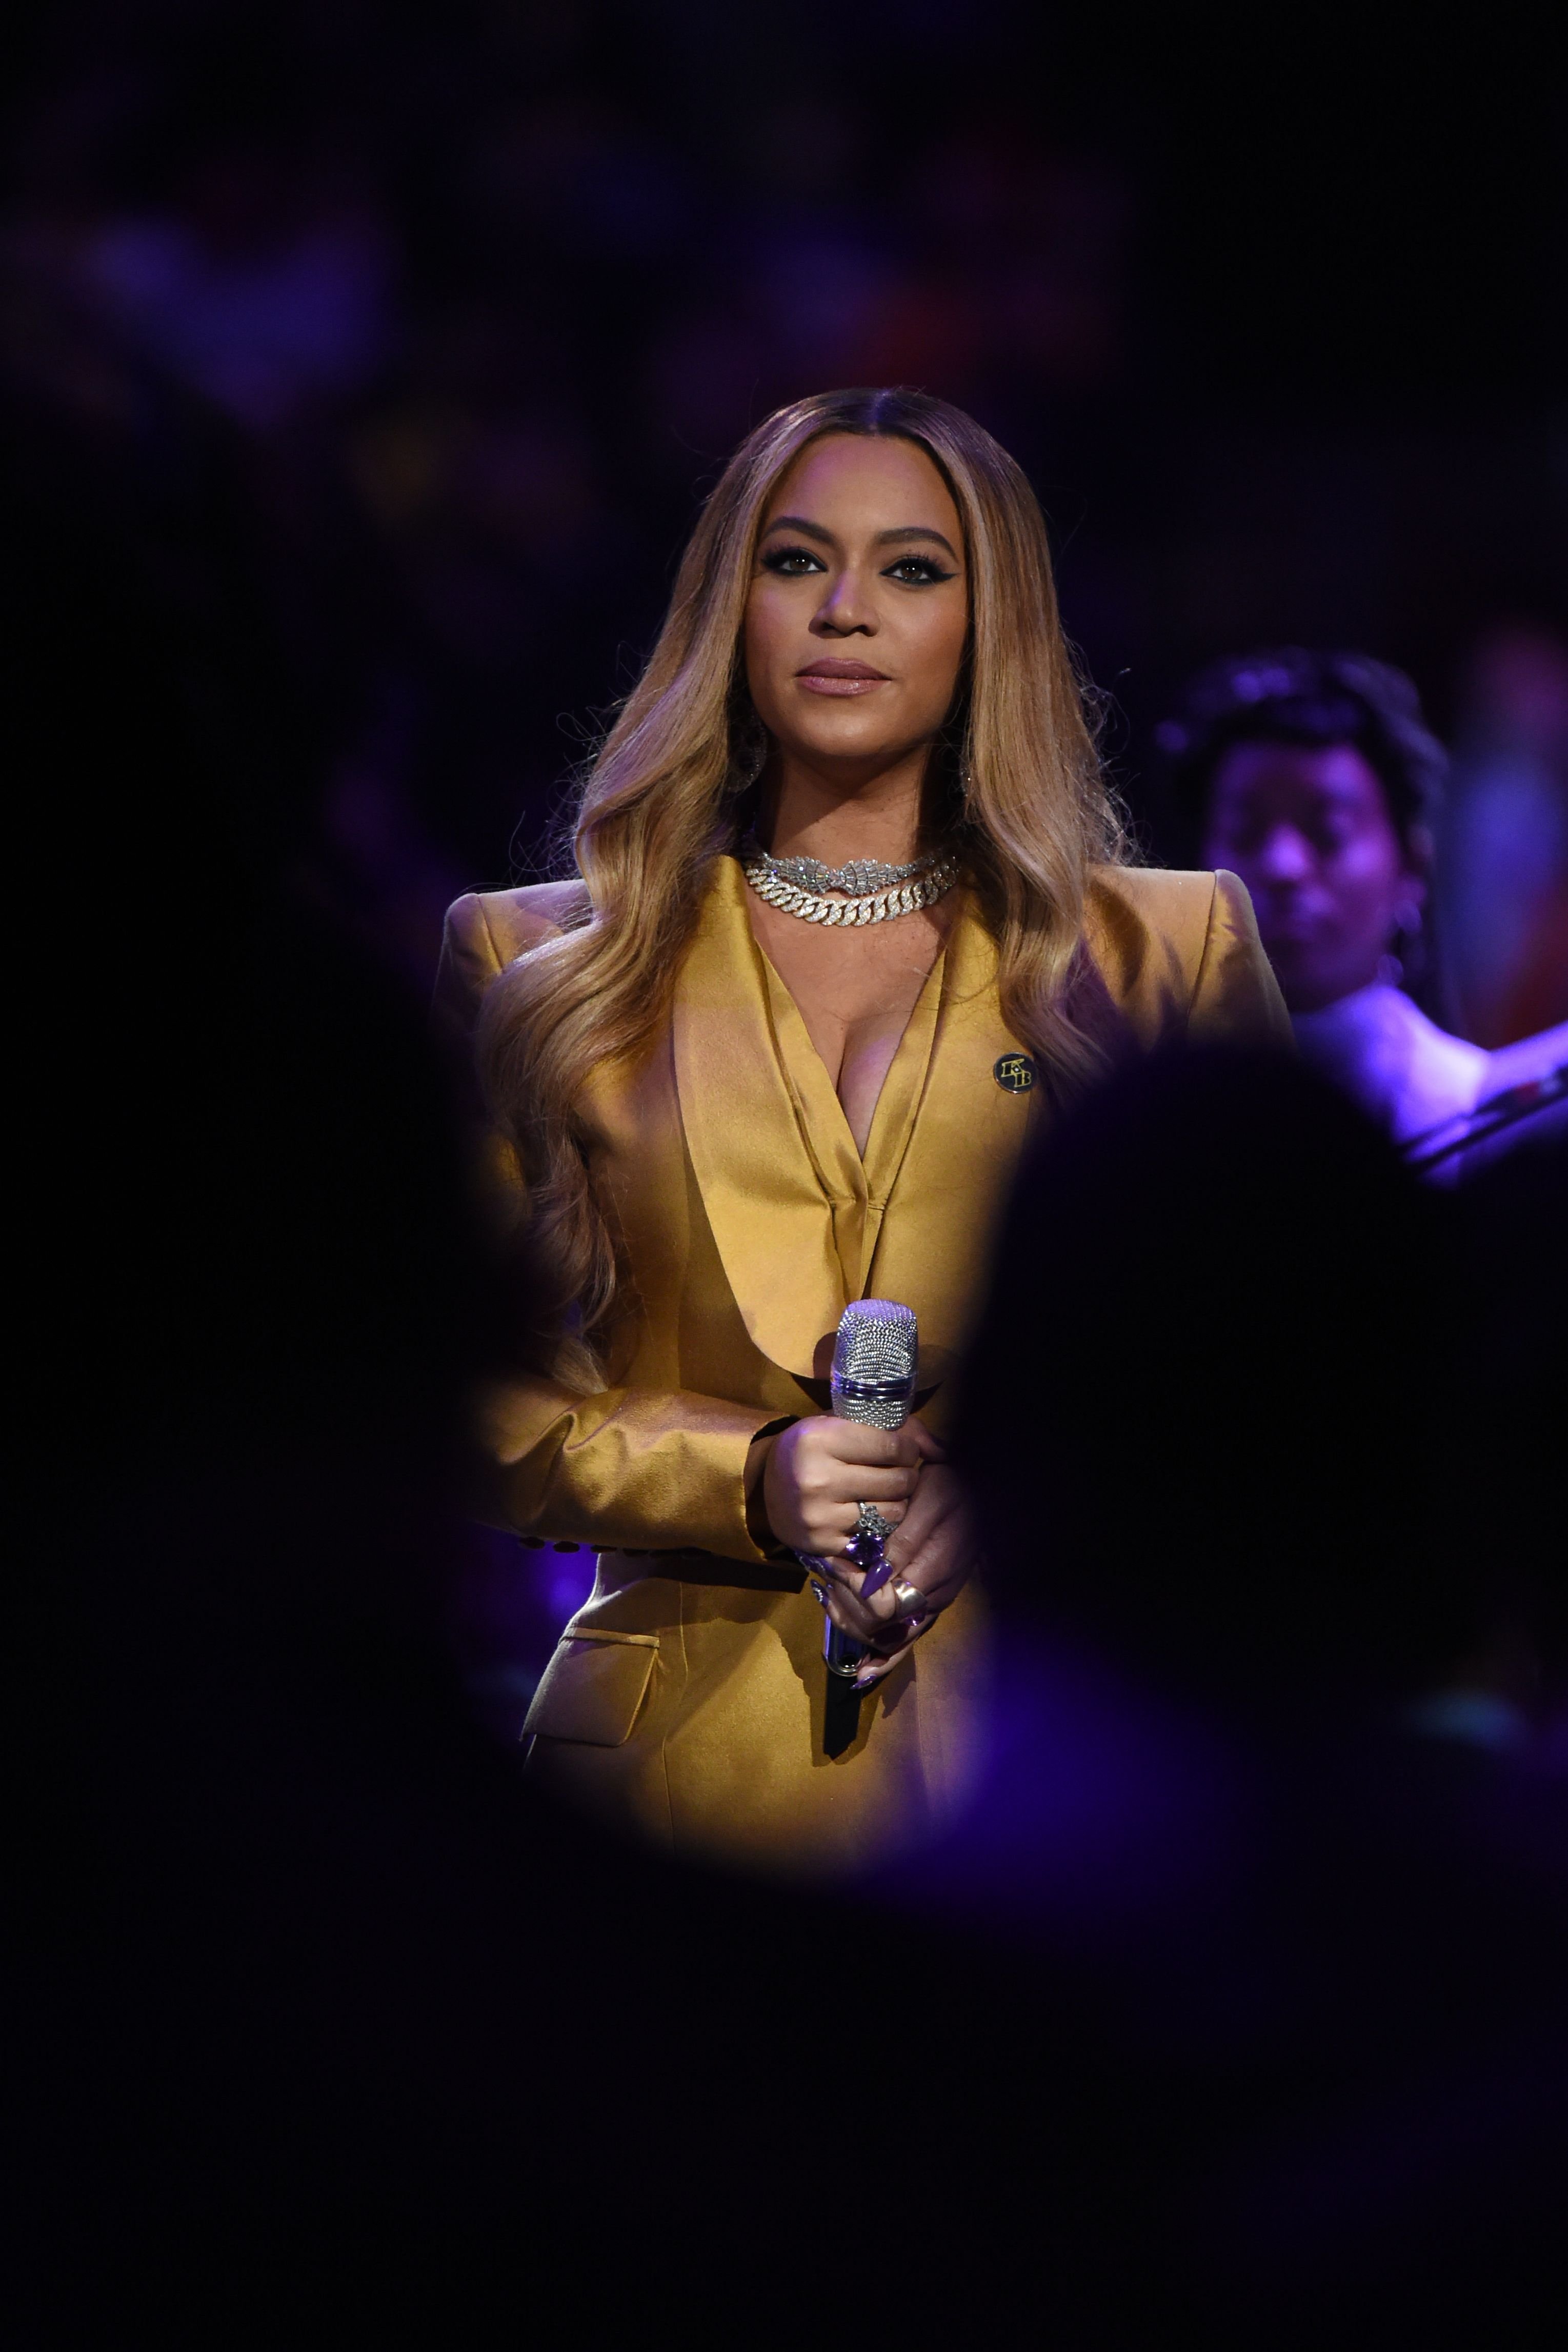 Beyoncé at the Kobe Bryant Memorial Service on February 24, 2020, at the STAPLES Center in Los Angeles, California | Photo: Getty Images